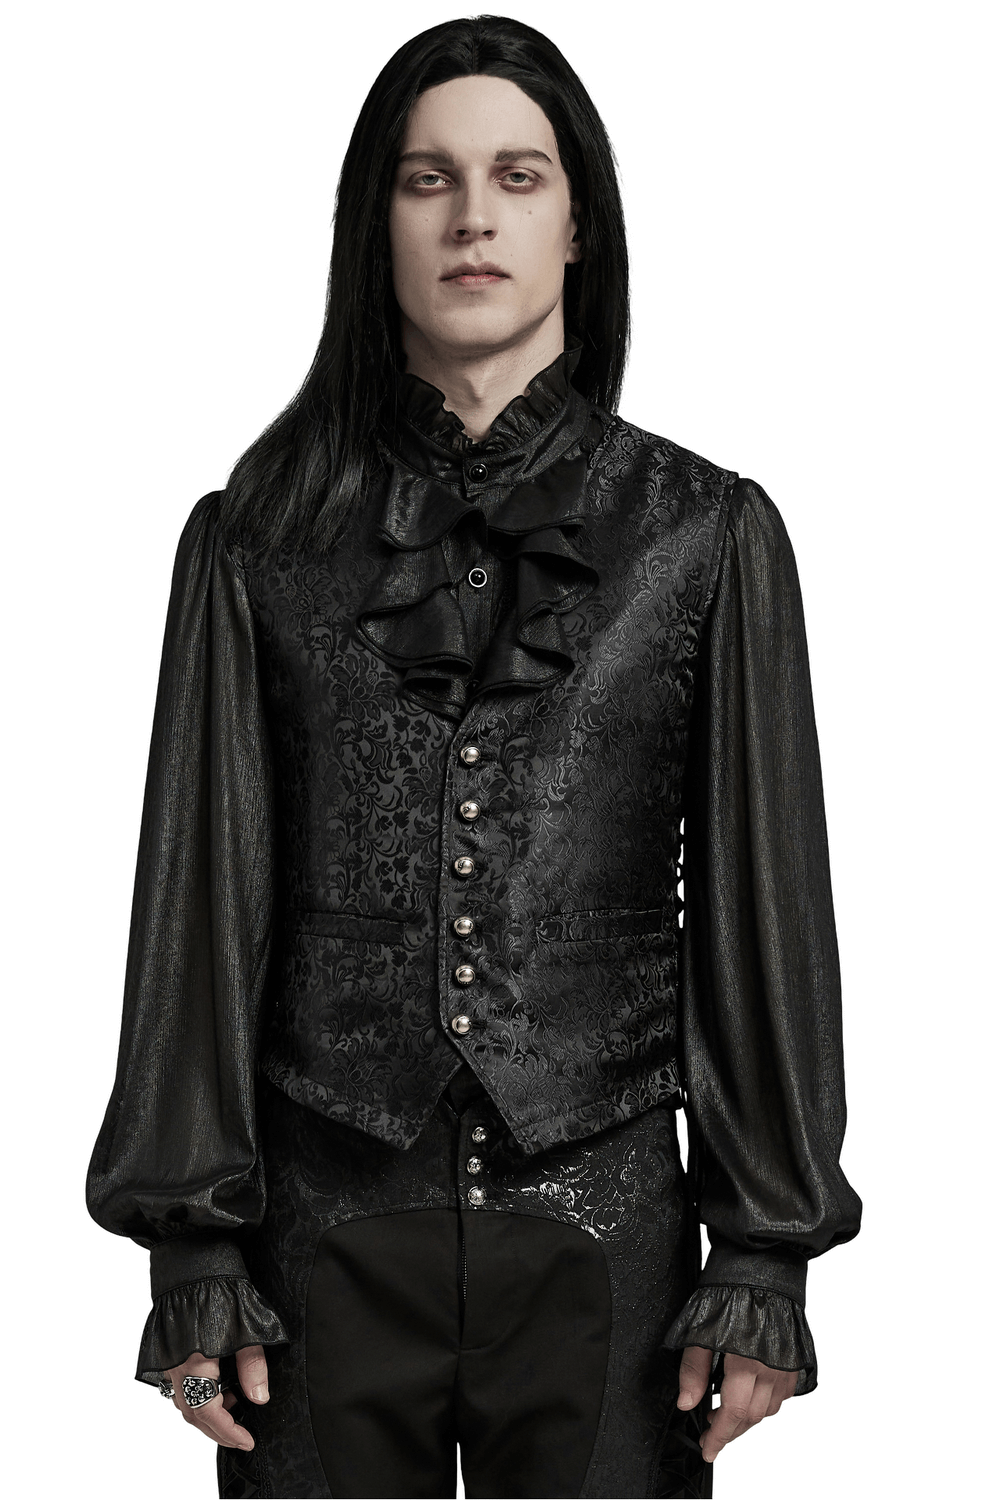 Gothic Floral Jacquard Waistcoat with Lacing on Sides